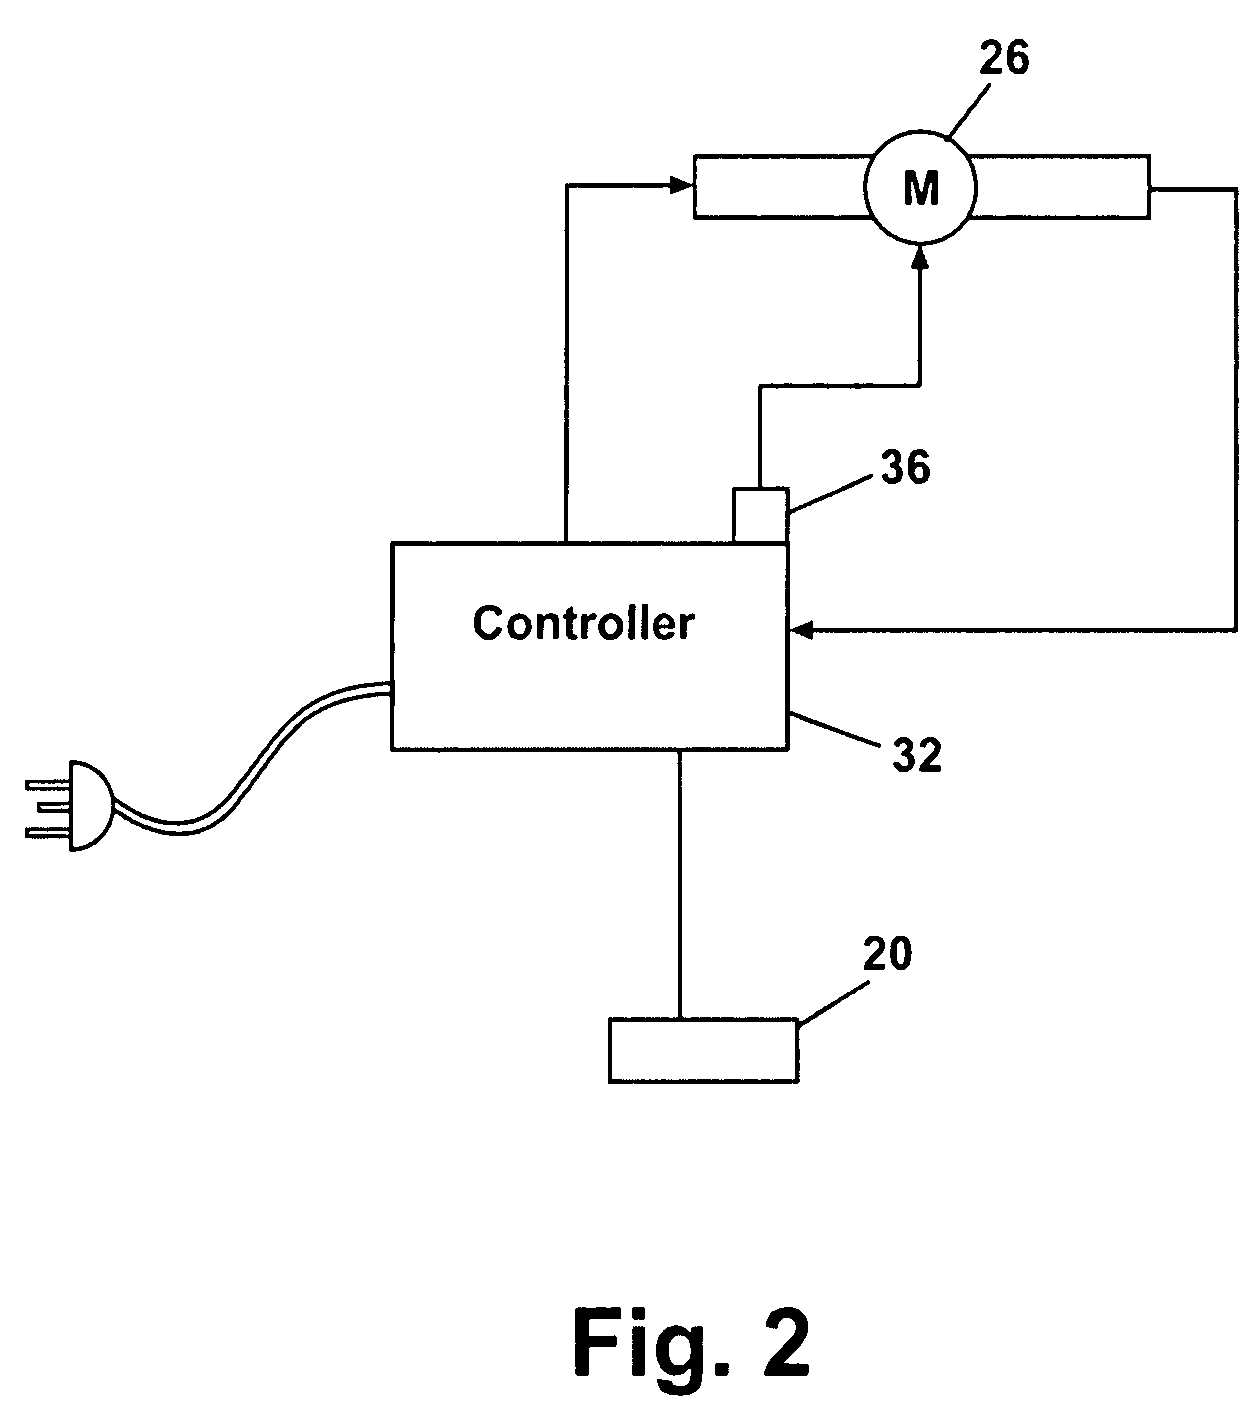 Utilizing motor current variations to control mixer operation